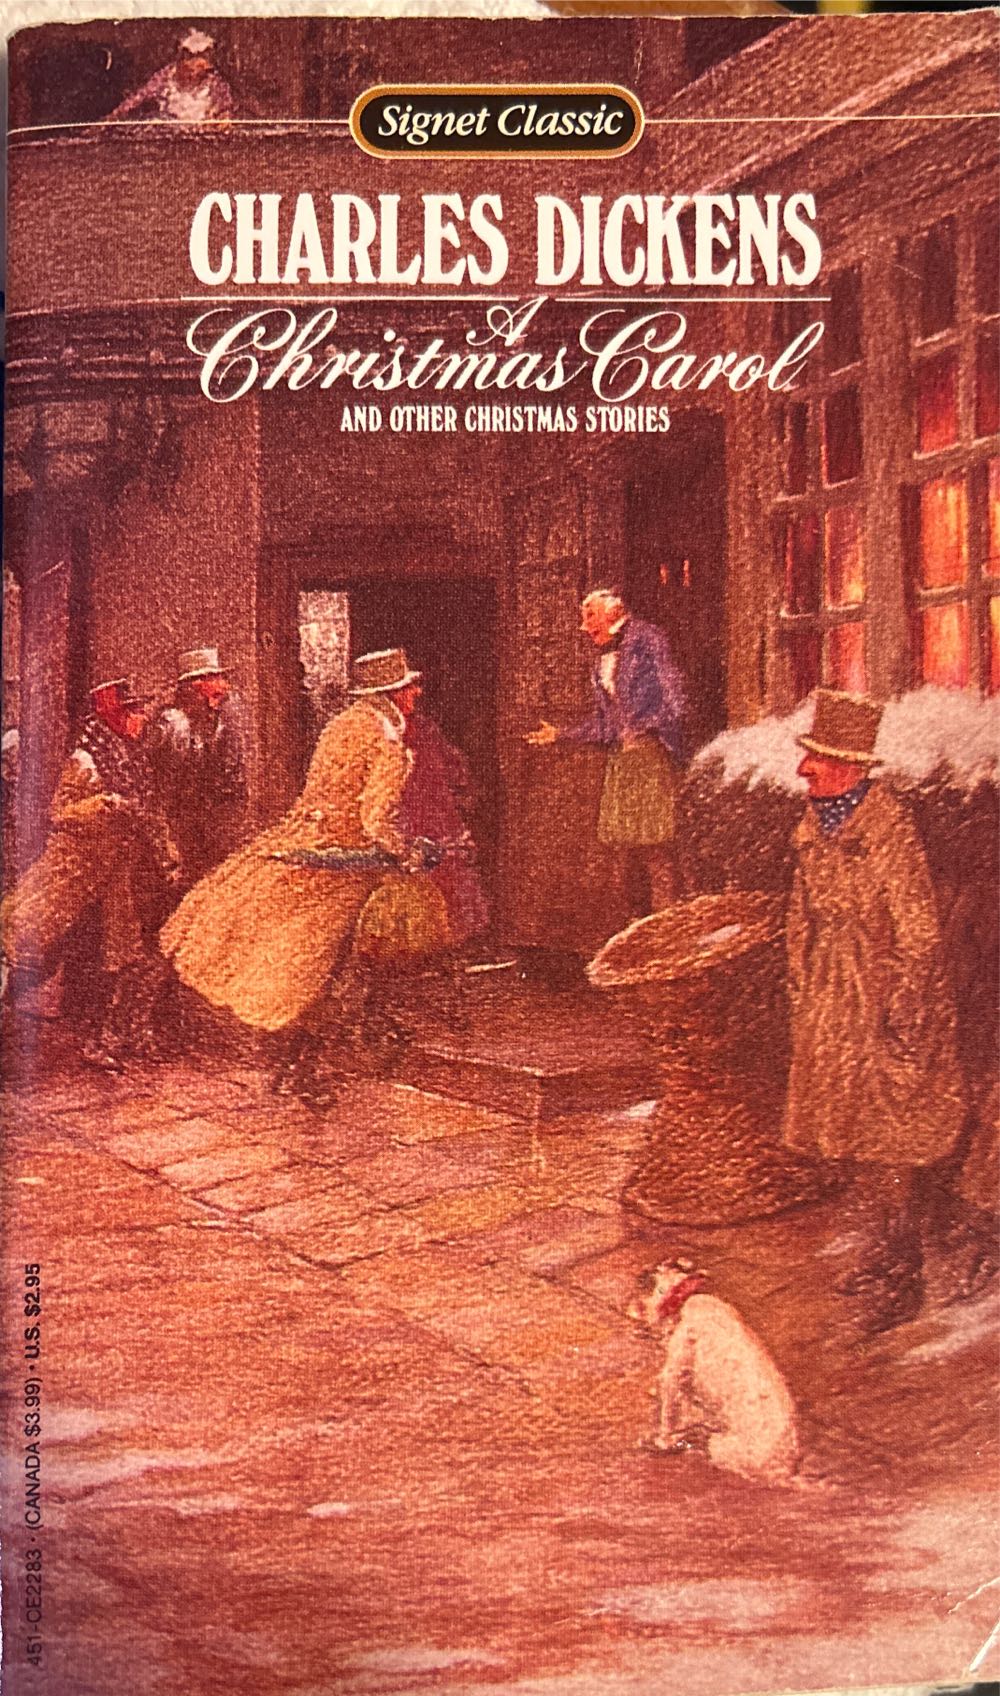 A Christmas Carol: And Other Christmas Stories (Signet Classics) - Charles Dickens (Signet Classics - Paperback) book collectible [Barcode 9780451522832] - Main Image 3